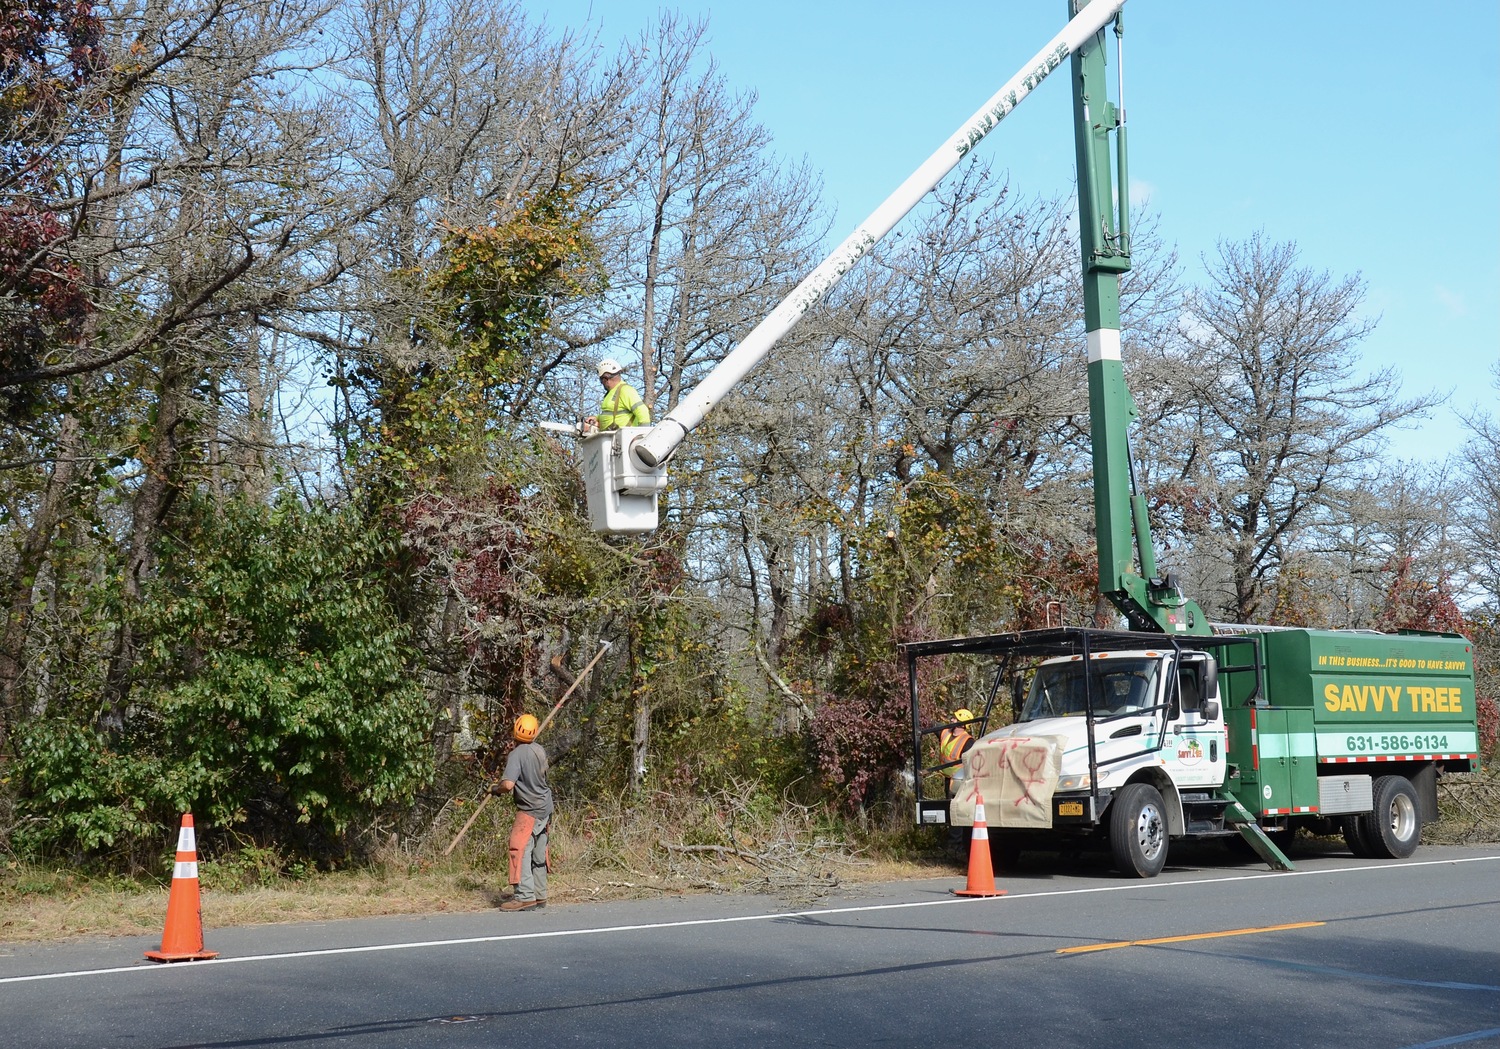 Crews working for the state Department of Transportation are cutting down thousands of dead trees along Montauk Highway in Napeague. The trees, which died from infestations by southern pine beetles, were deemed a potential hazard to motorists on the highway. 
KYRIL BROMLEY